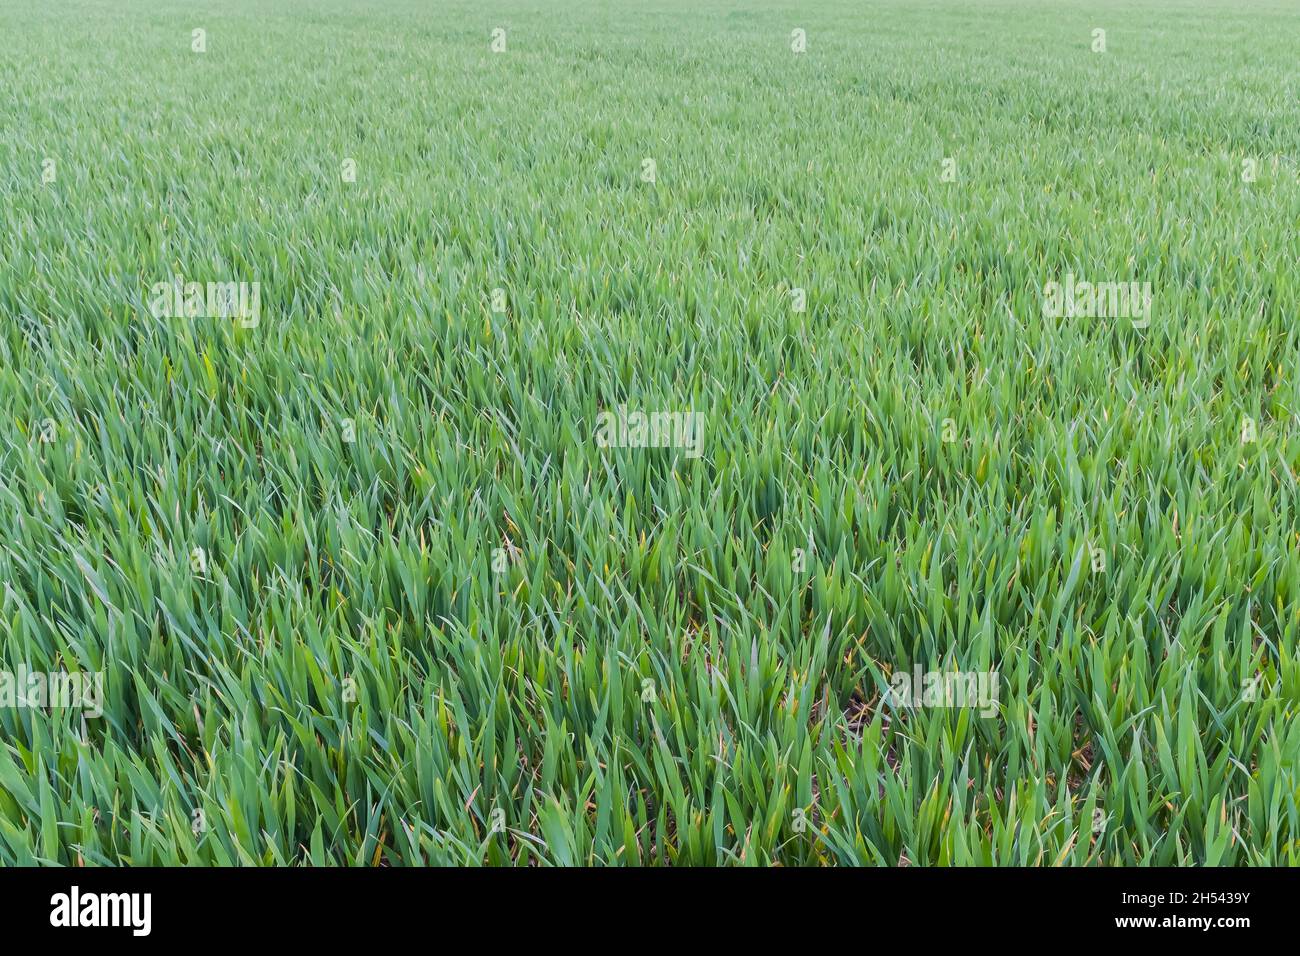 Green field of young wheat crops on UK farmland. Organic farming concept, background, texture or pattern Stock Photo